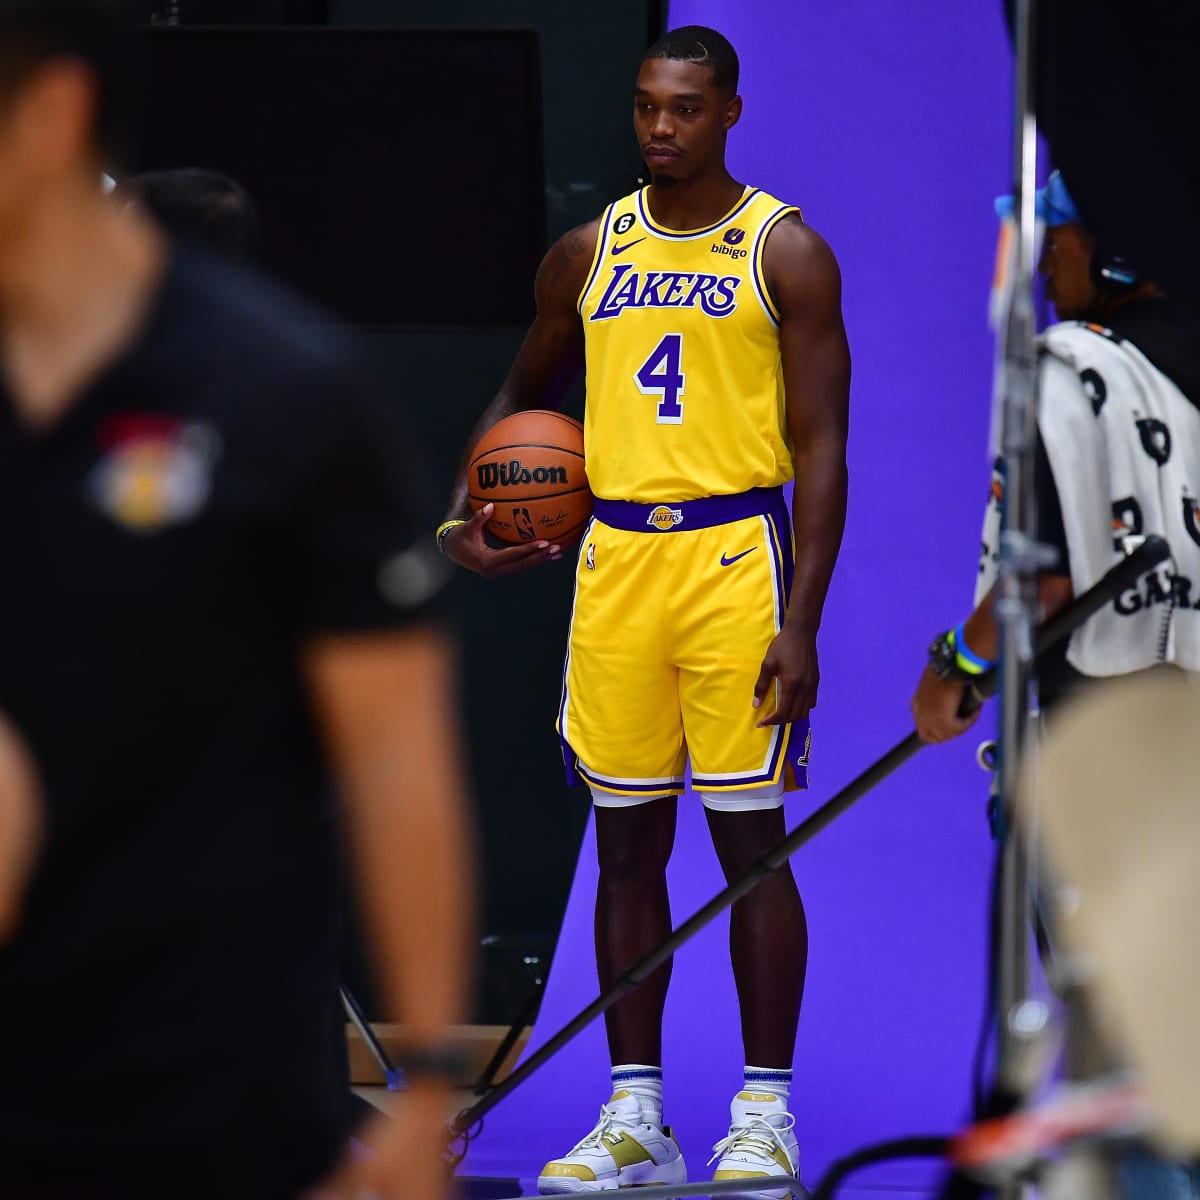 Lonnie Walker IV, the Lakers' unlikely hero in NBA Playoffs